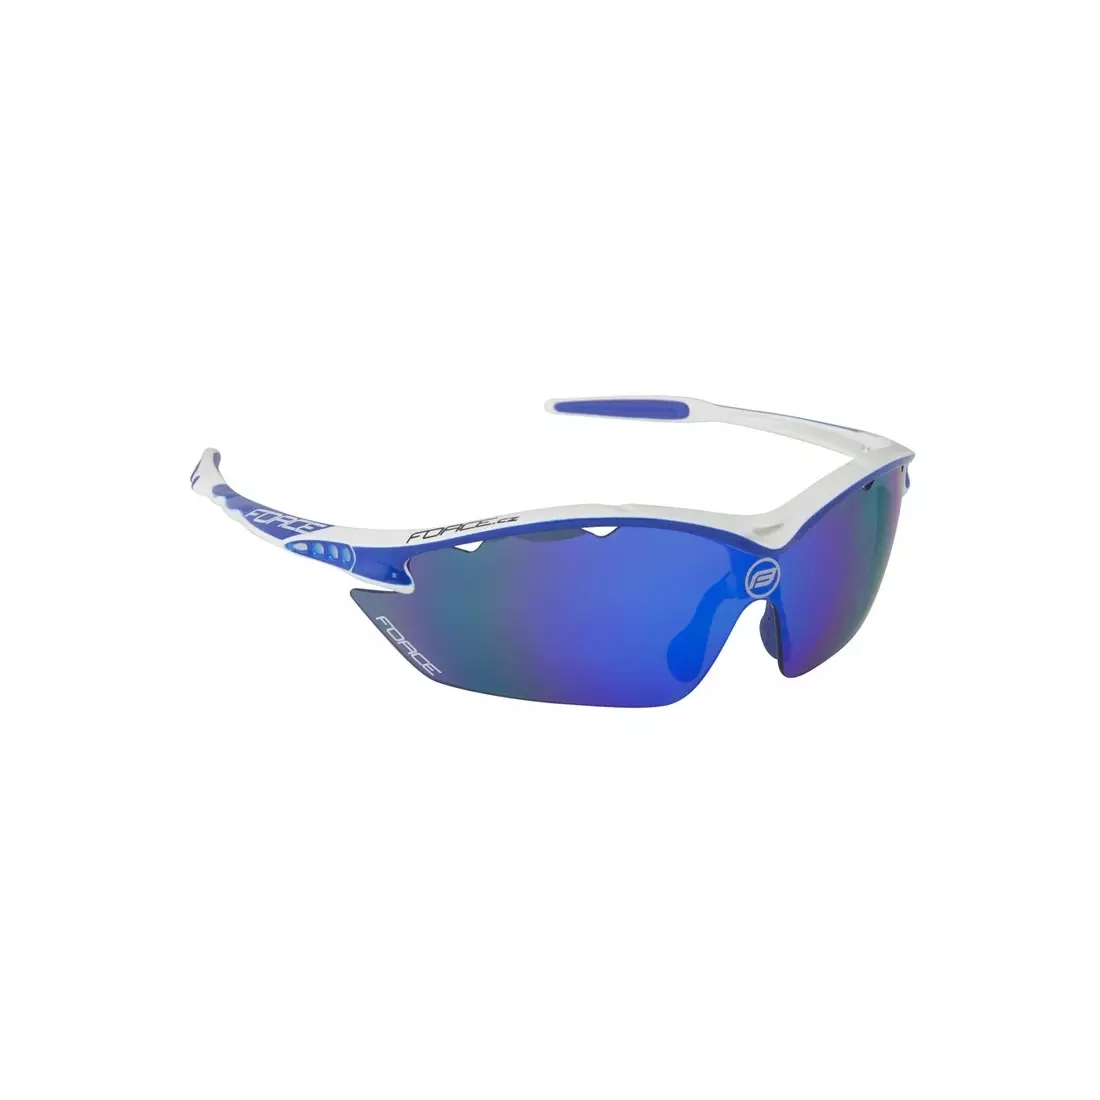 FORCE RON Sports/cycling glasses white and blue 91010 replaceable lenses